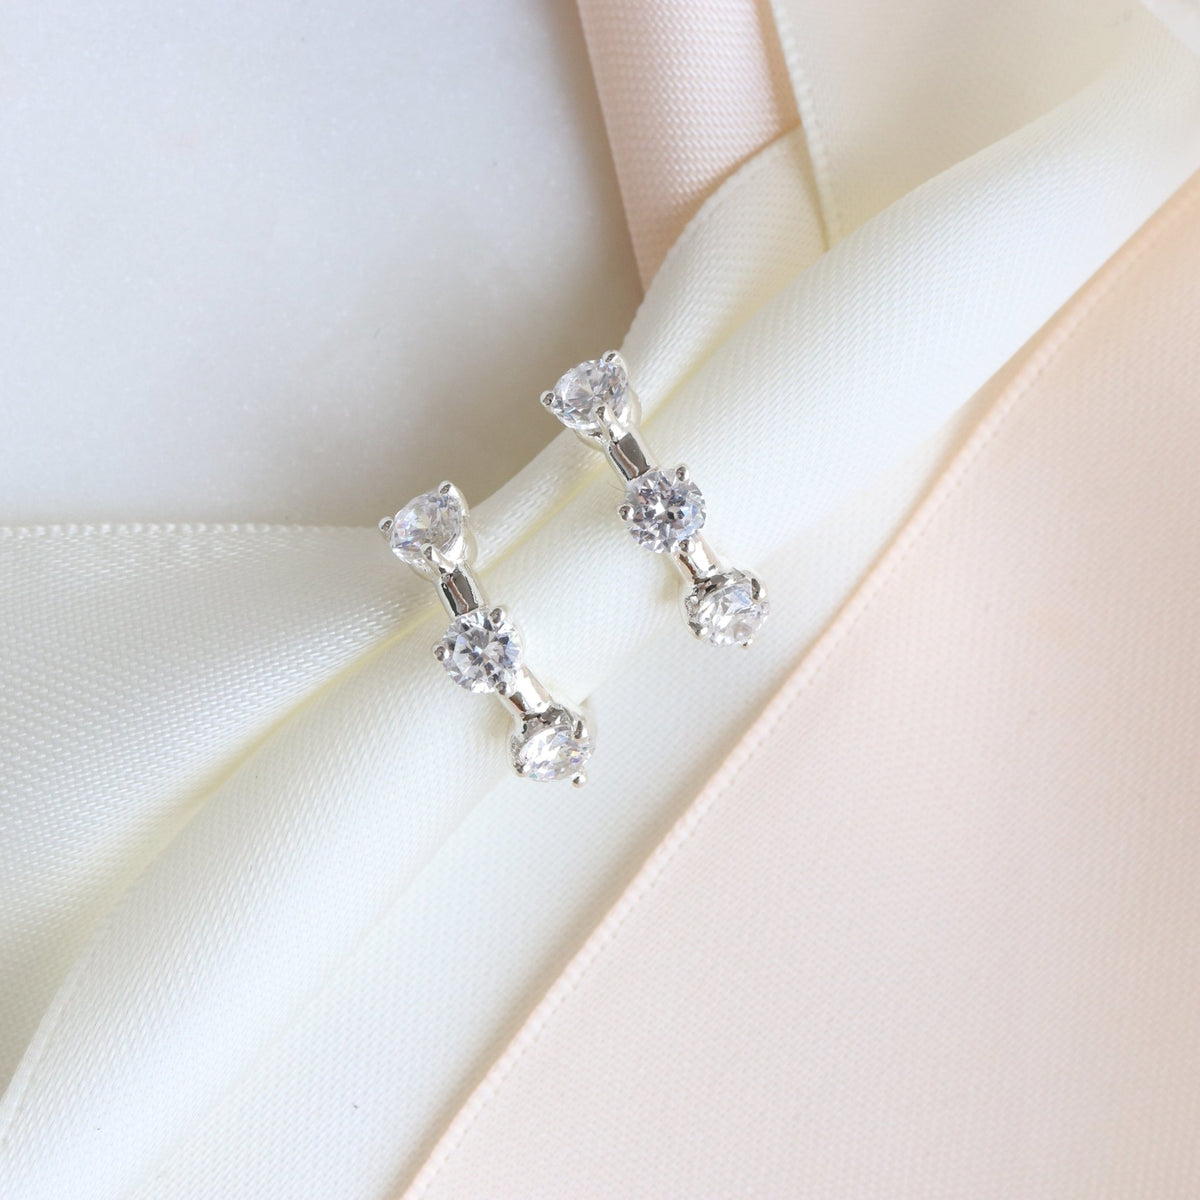 SCATTERED LOVE HUGGIE HOOPS - CUBIC ZIRCONIA &amp; SILVER - SO PRETTY CARA COTTER